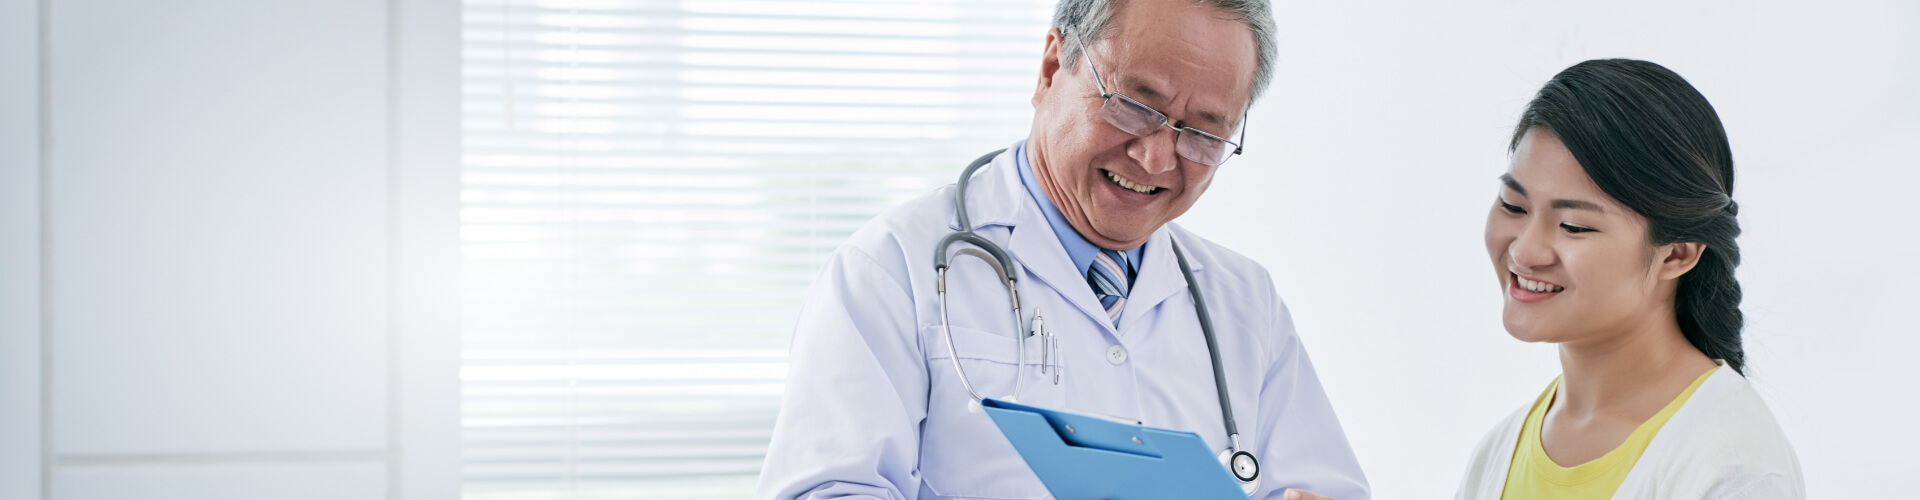 Guide to General Practitioners in Singapore: Trusted Primary Care